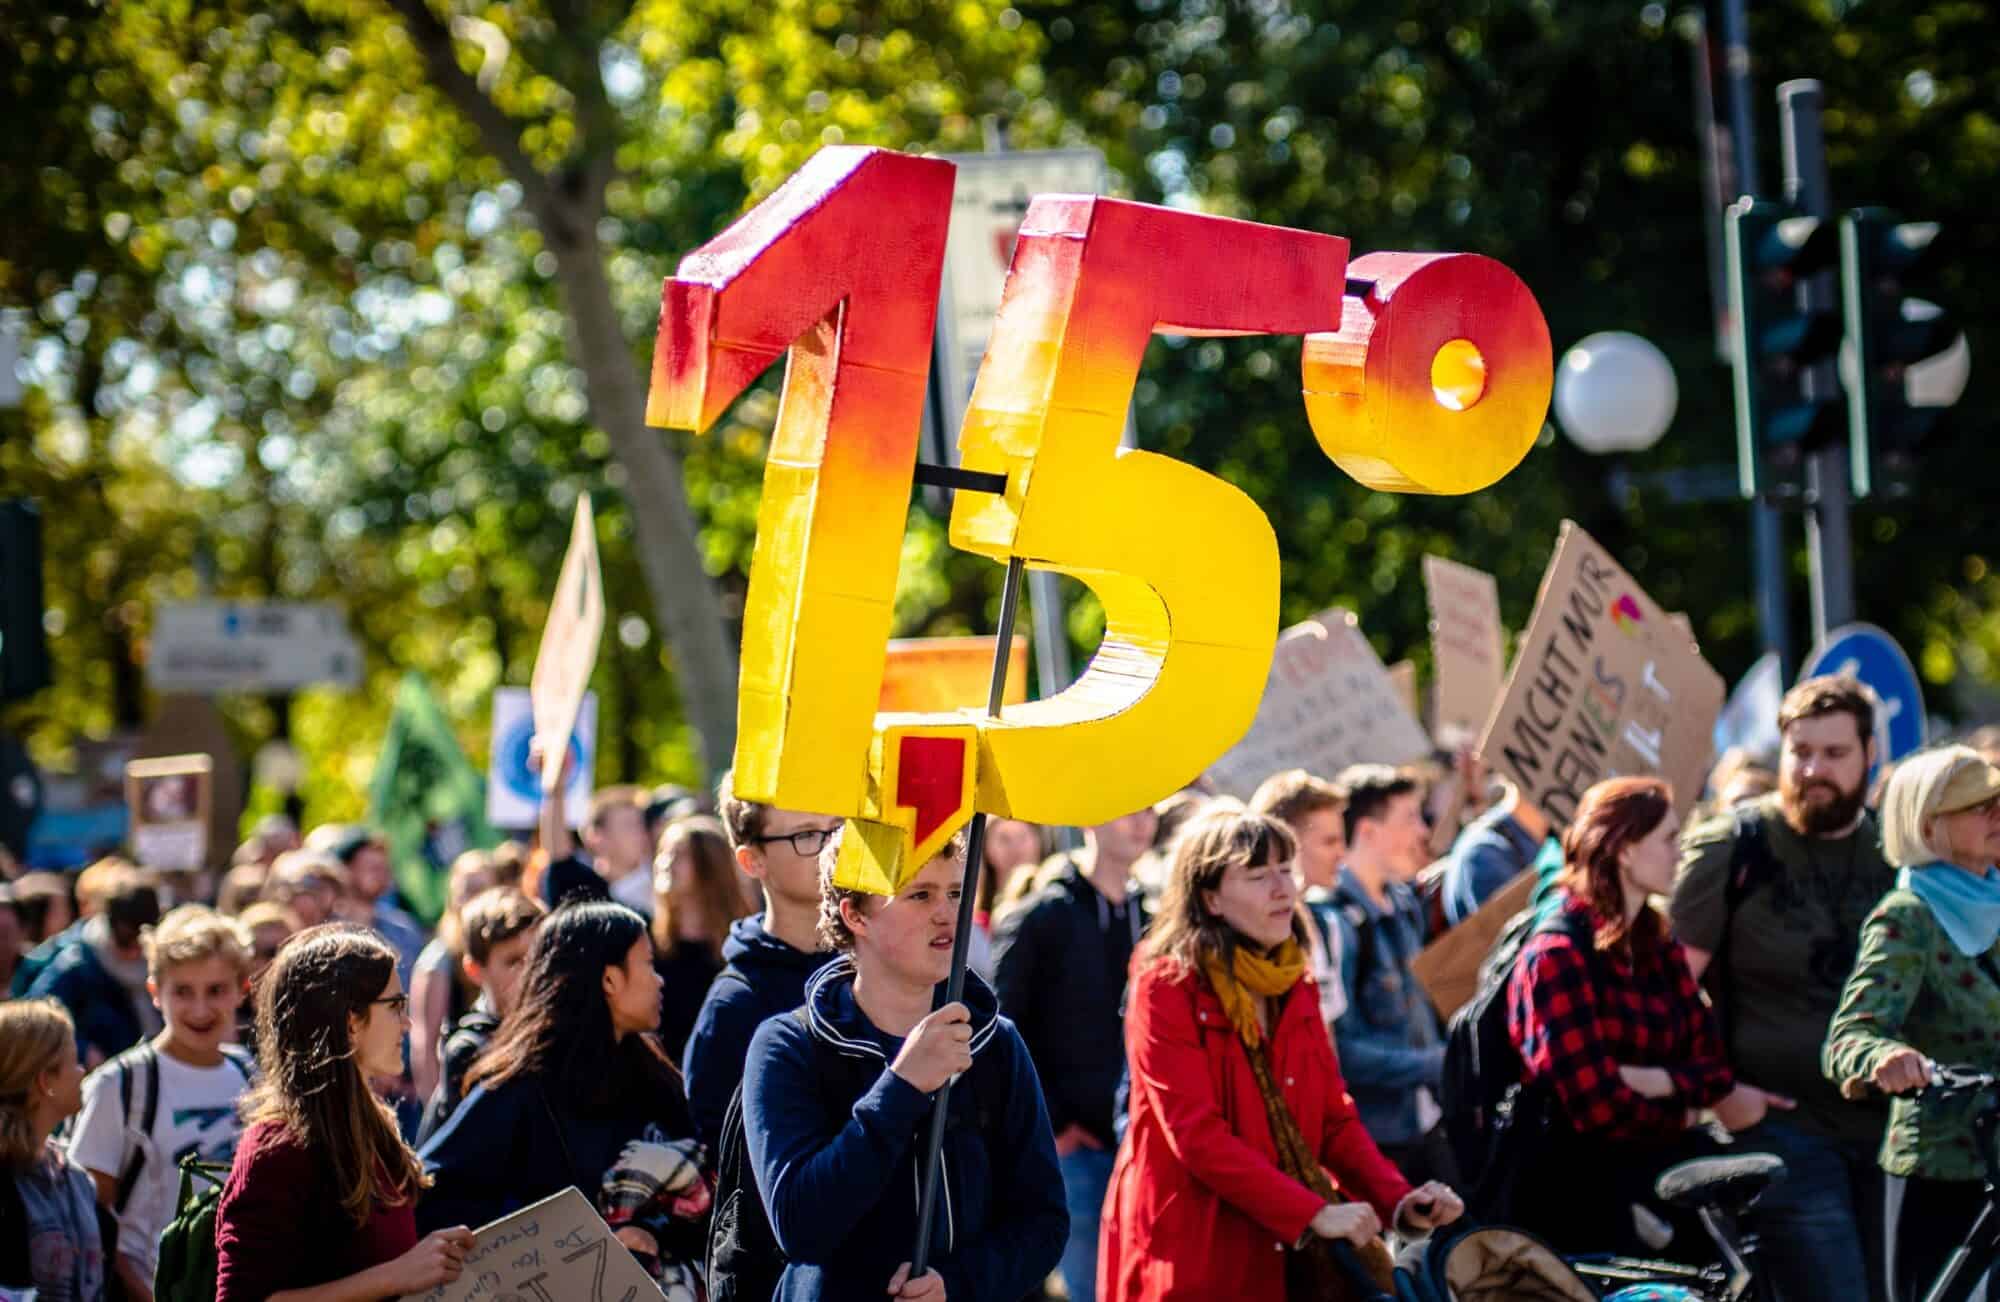 A climate protestor holds up a sign that says '1.5 degrees' referring to the limit of global average temperature change until irreversible catastrophic climate change.